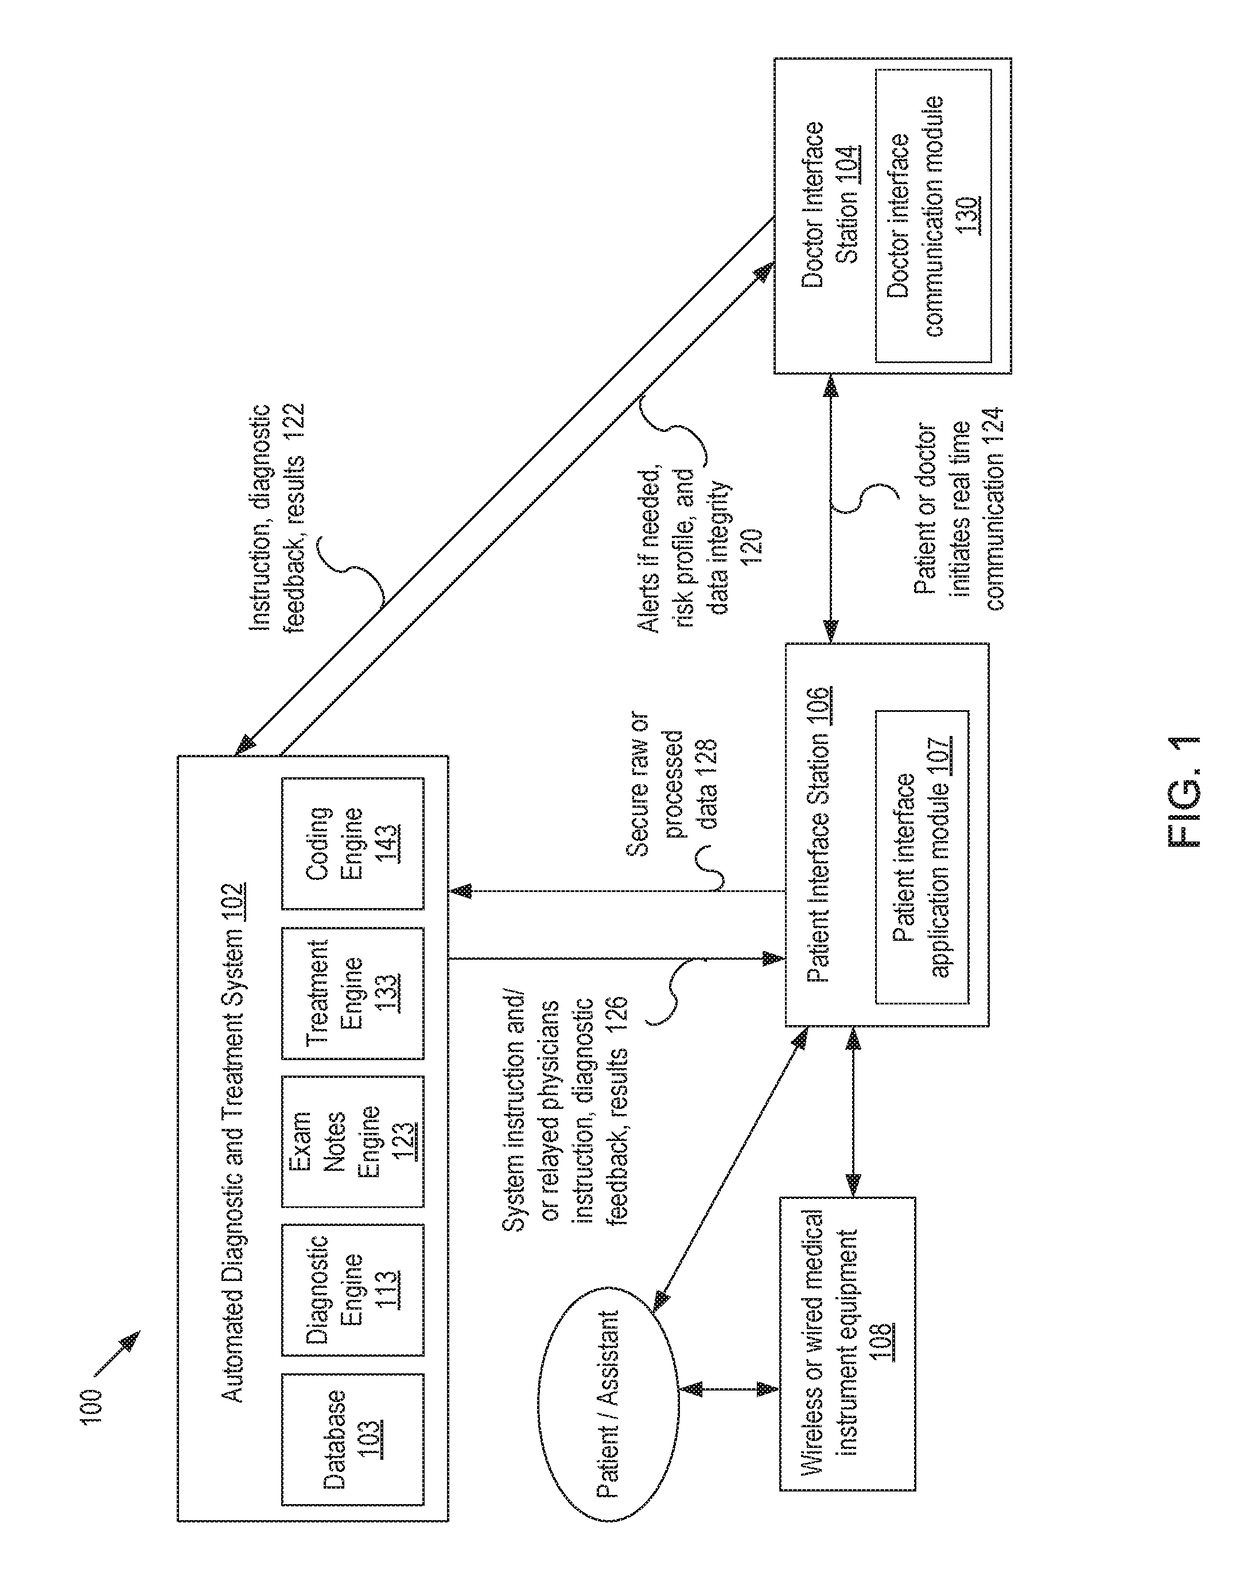 Patient treatment systems and methods